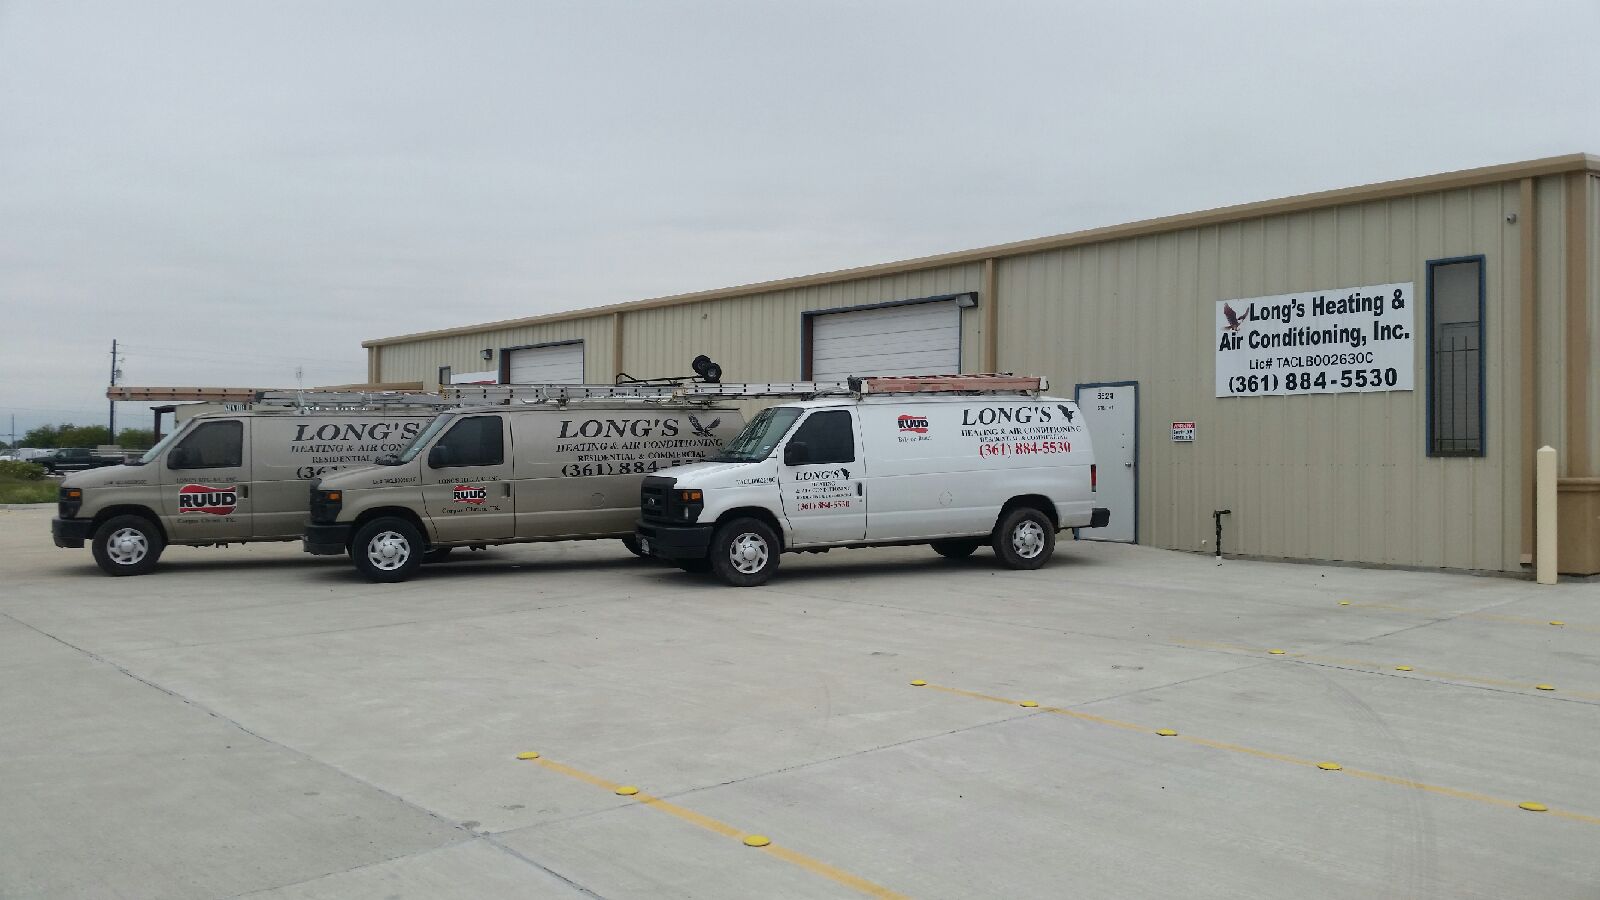 Long's Heating & Air Conditioning